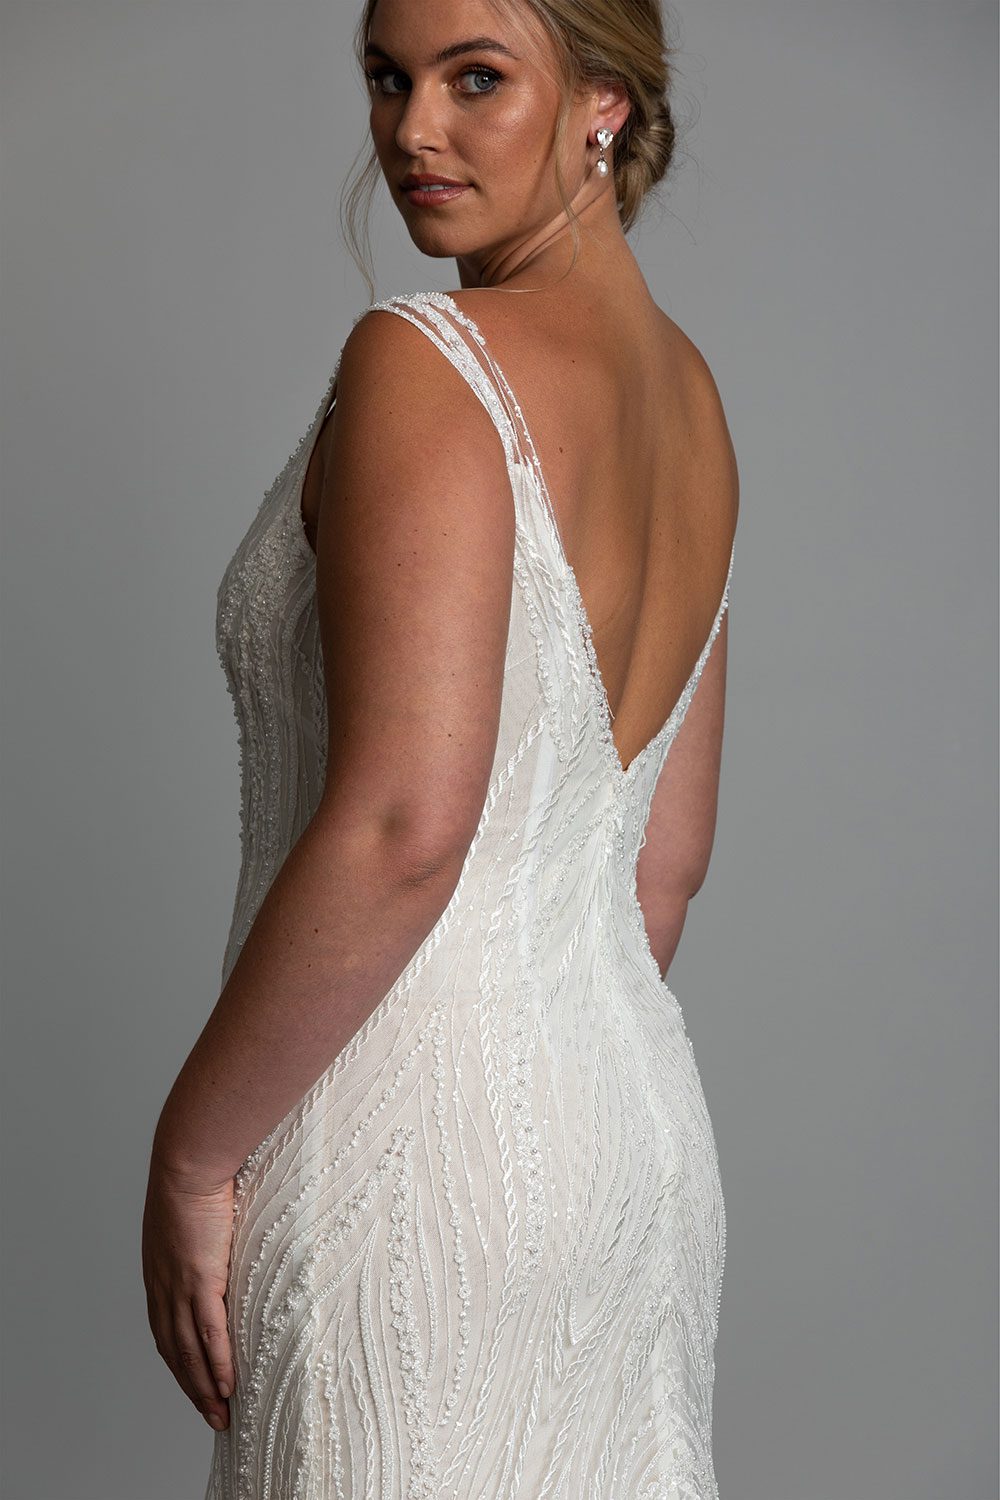 Kiera Wedding Dress from Vinka Design. Beautifully beaded lace wedding dress. Deep V-neckline both front and back is complemented with delicate sheer lace shoulder detail & structured bodice. Close up of deep V back with boing and beaded lace